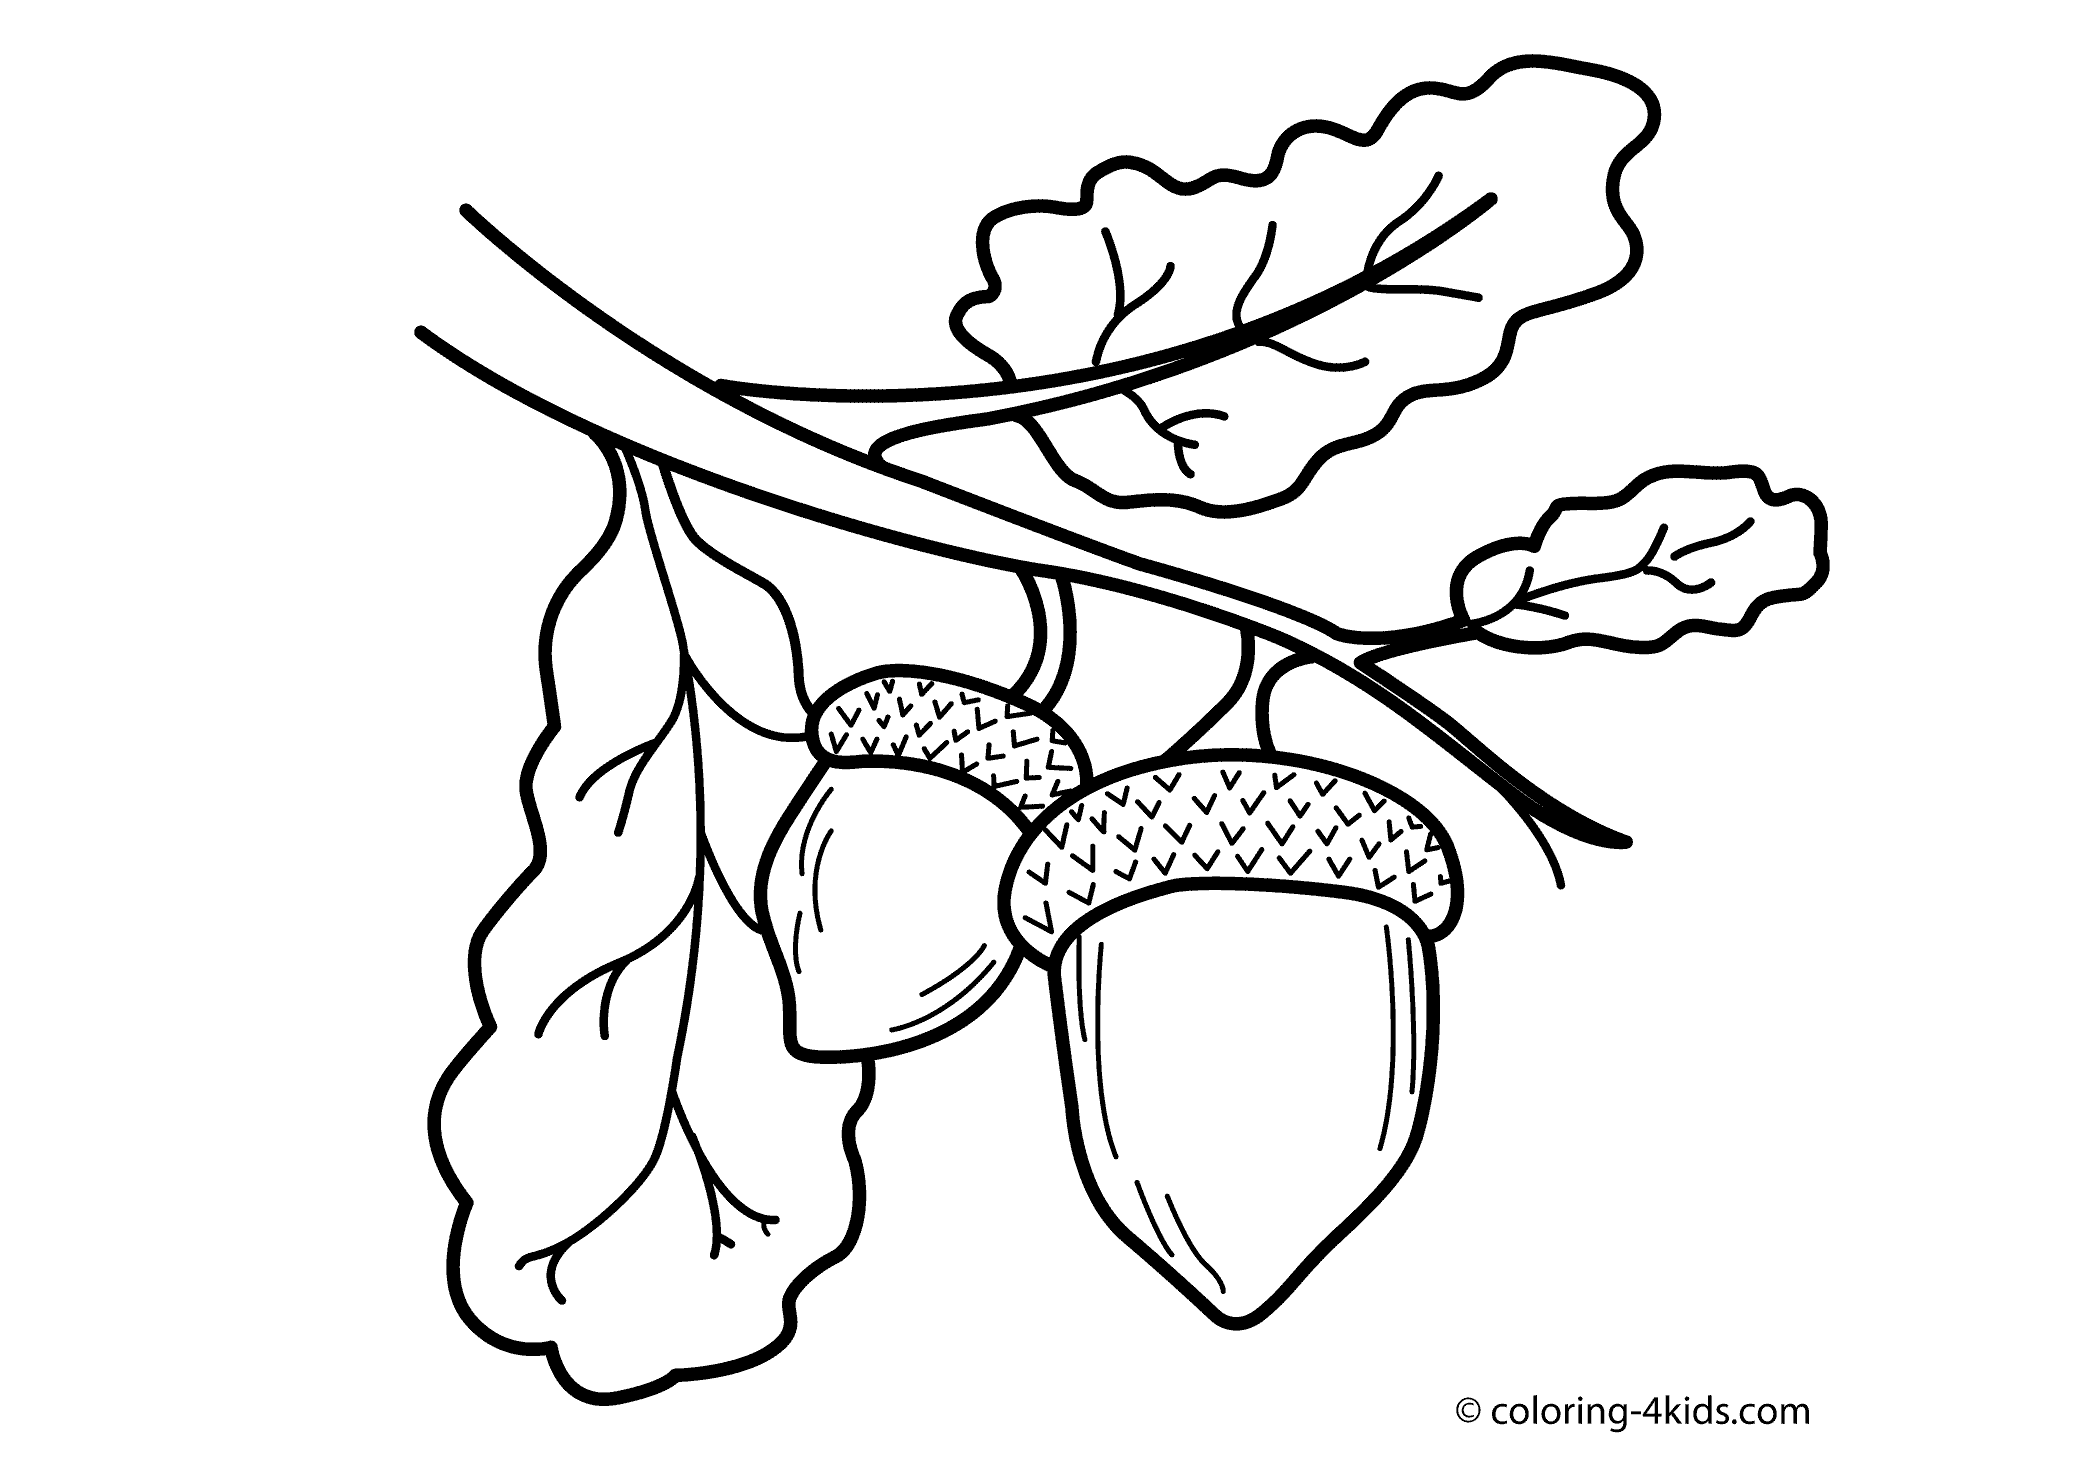 acorn-coloring-pages-to-print-fall-coloring-pages-fall-art-projects